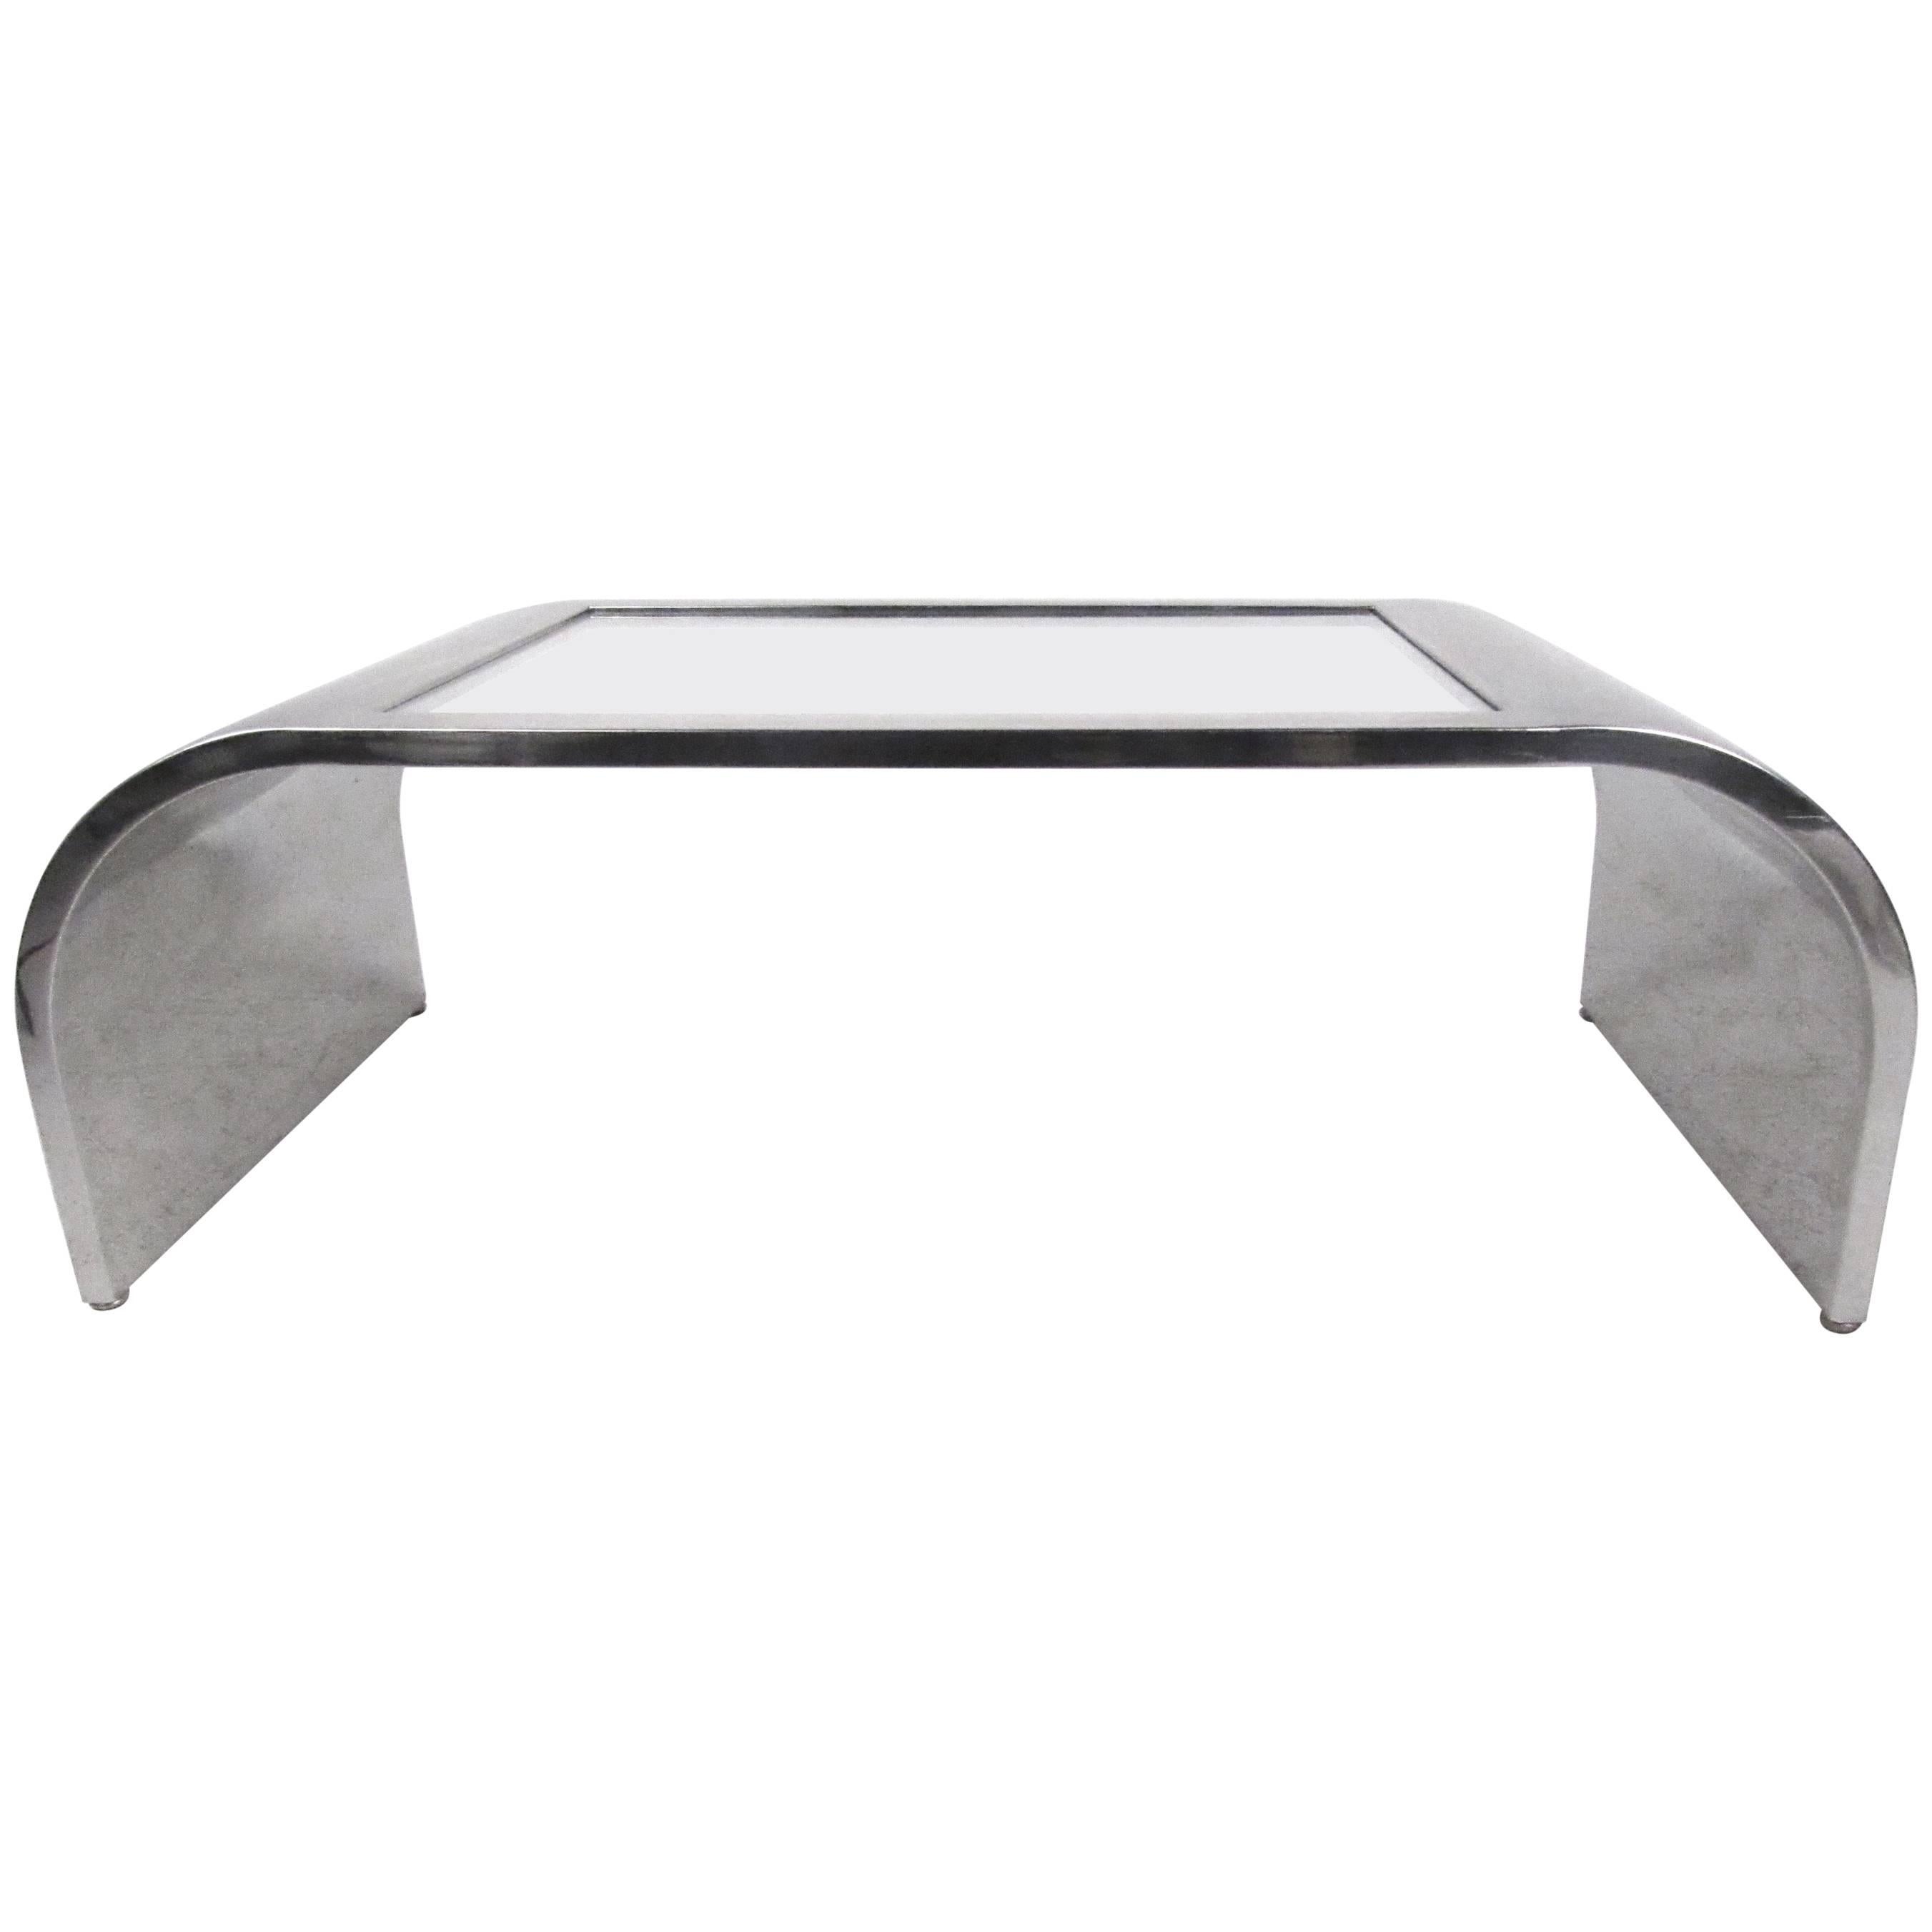 This stainless steel and glass coffee table features a stylish waterfall design with sculptural curved edges, and unique Spage Age modern appeal. Perfect coffee table for any interior, please confirm item location (NY or NJ).